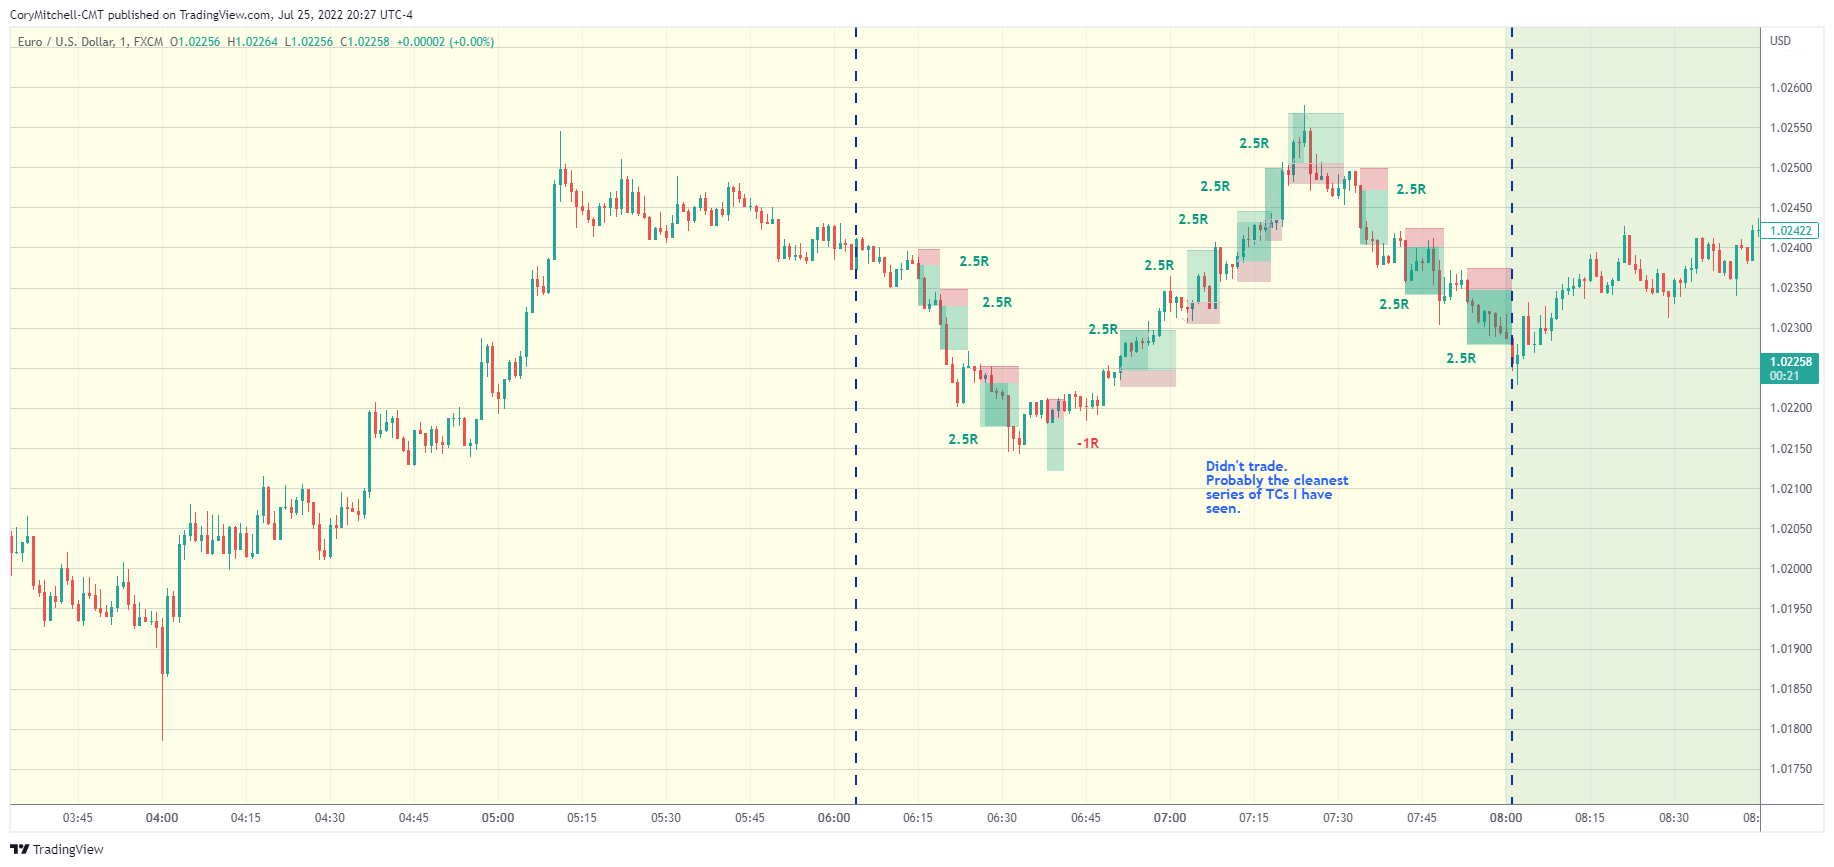 EURUSD day trading strategy examples July 25